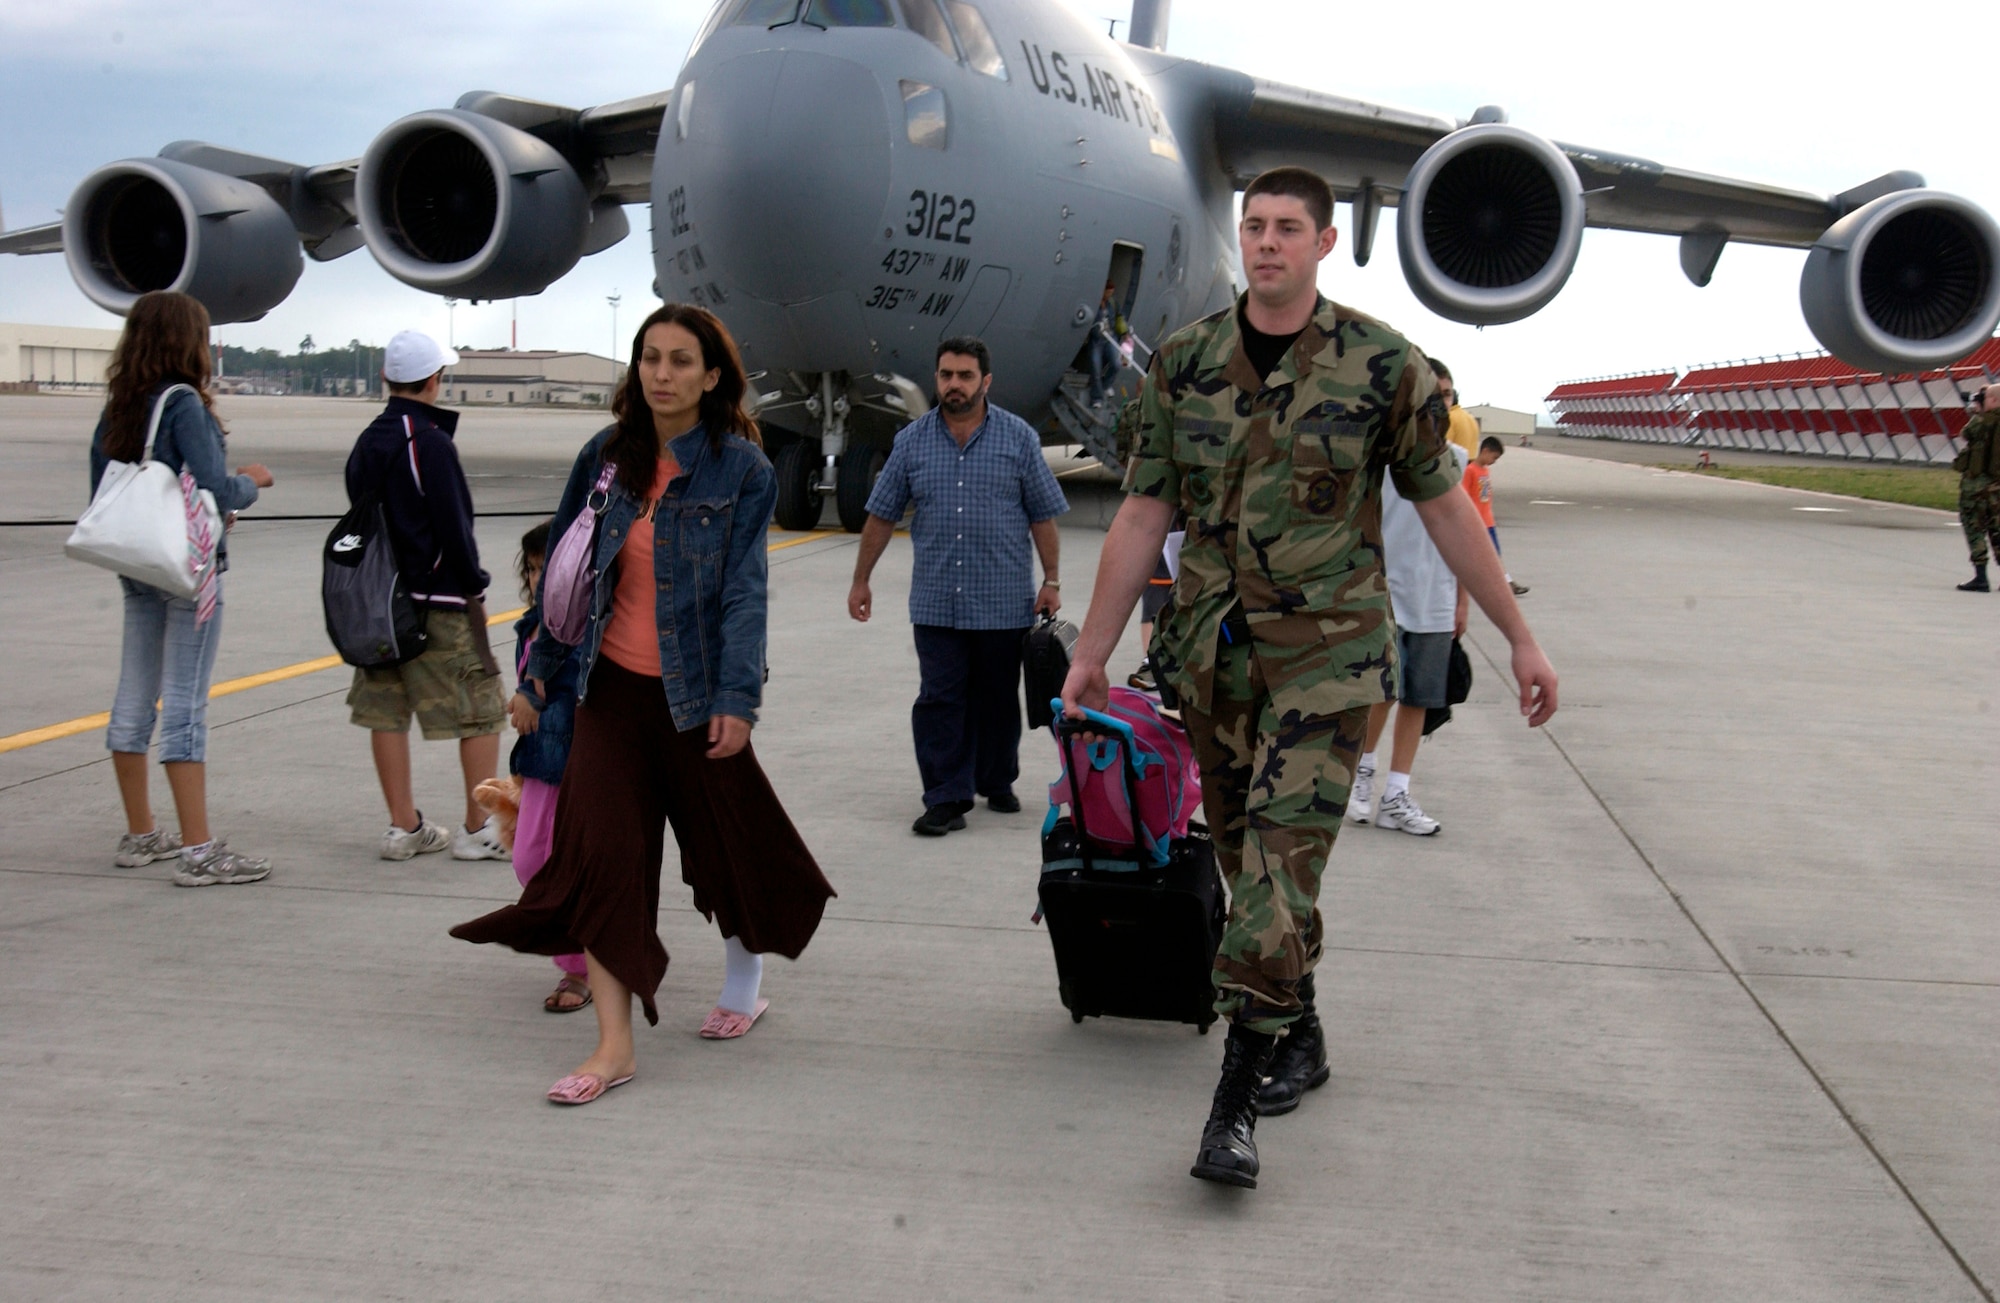 Senior Airman Benjamin Schmidt assists an American citizen with her luggage at Ramstein Air Base, Germany, on July 23. Ramstein Airmen provided humanitarian assistance for Americans departing the Lebanon crisis on their way to the United States. Airman Schmidt is with the 723rd Air Mobility Squadron. (U.S. Air Force photo/Staff Sgt. Angela B. Malek) 